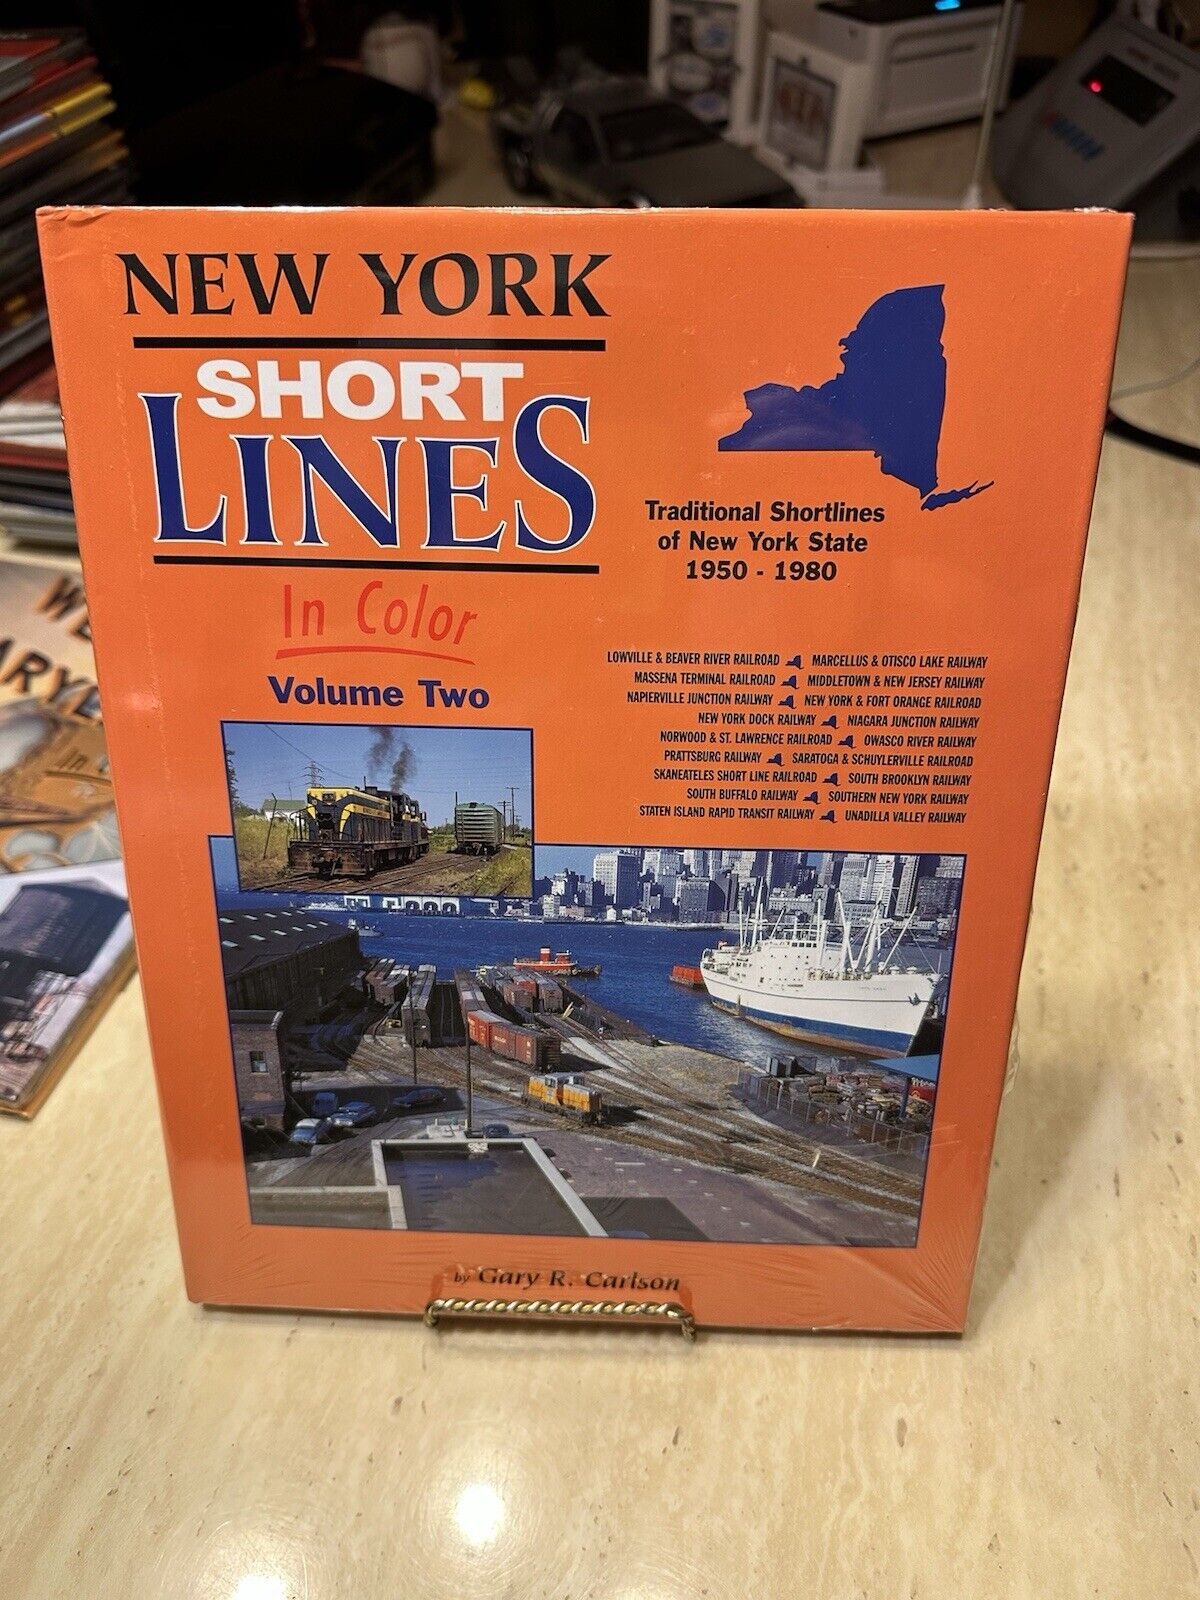 Morning Sun: New York Short Lines Volume Two by Gary R Carlson ©2012 Sealed